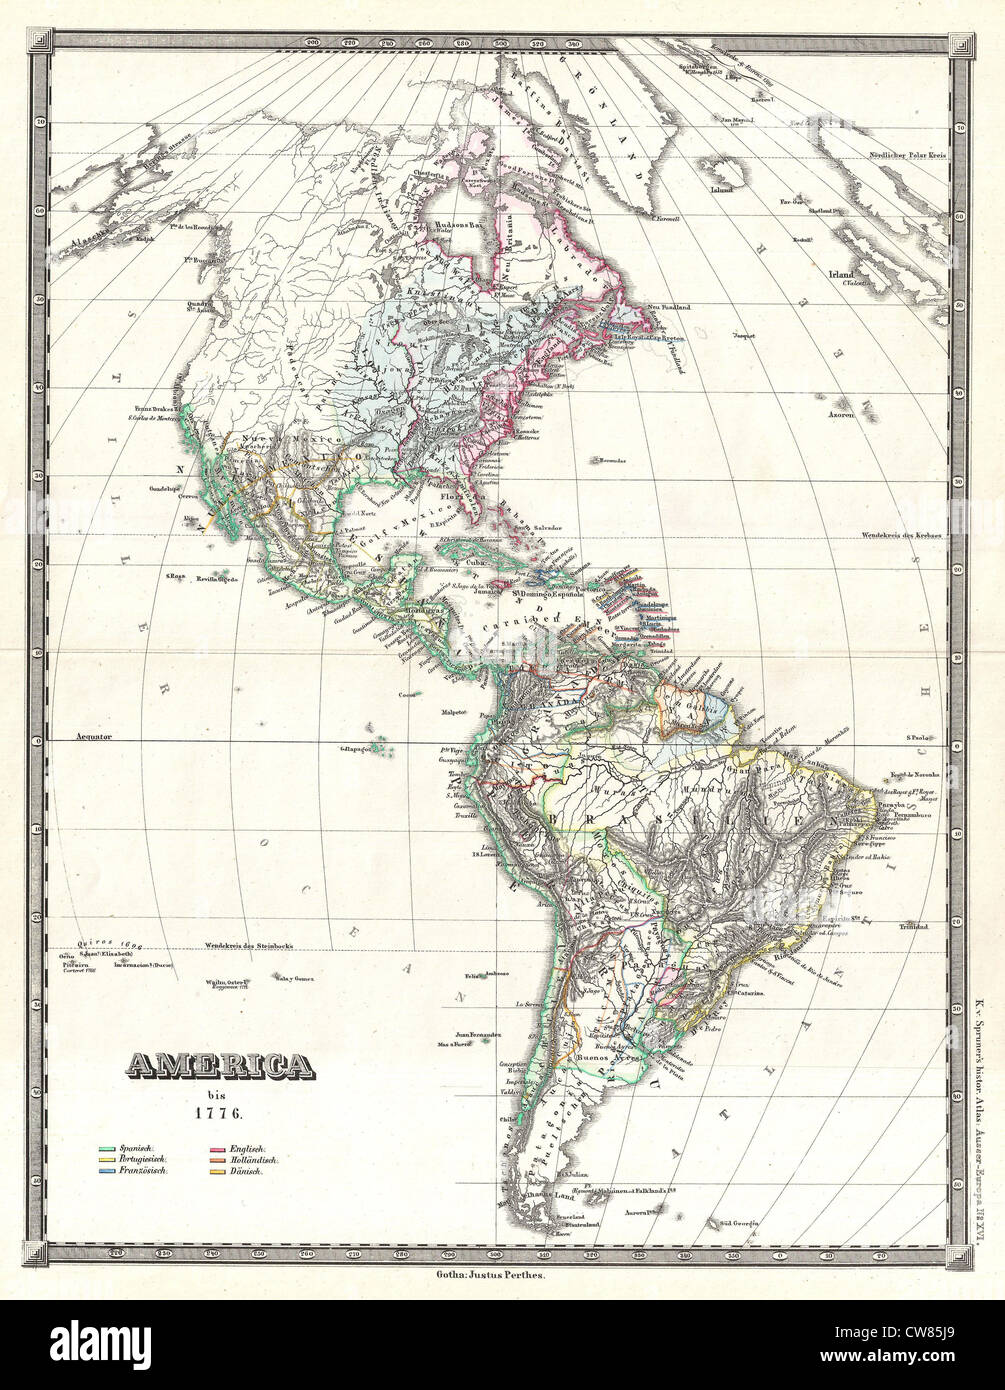 1855 Spruner Map of the Americas up to 1776 Stock Photo